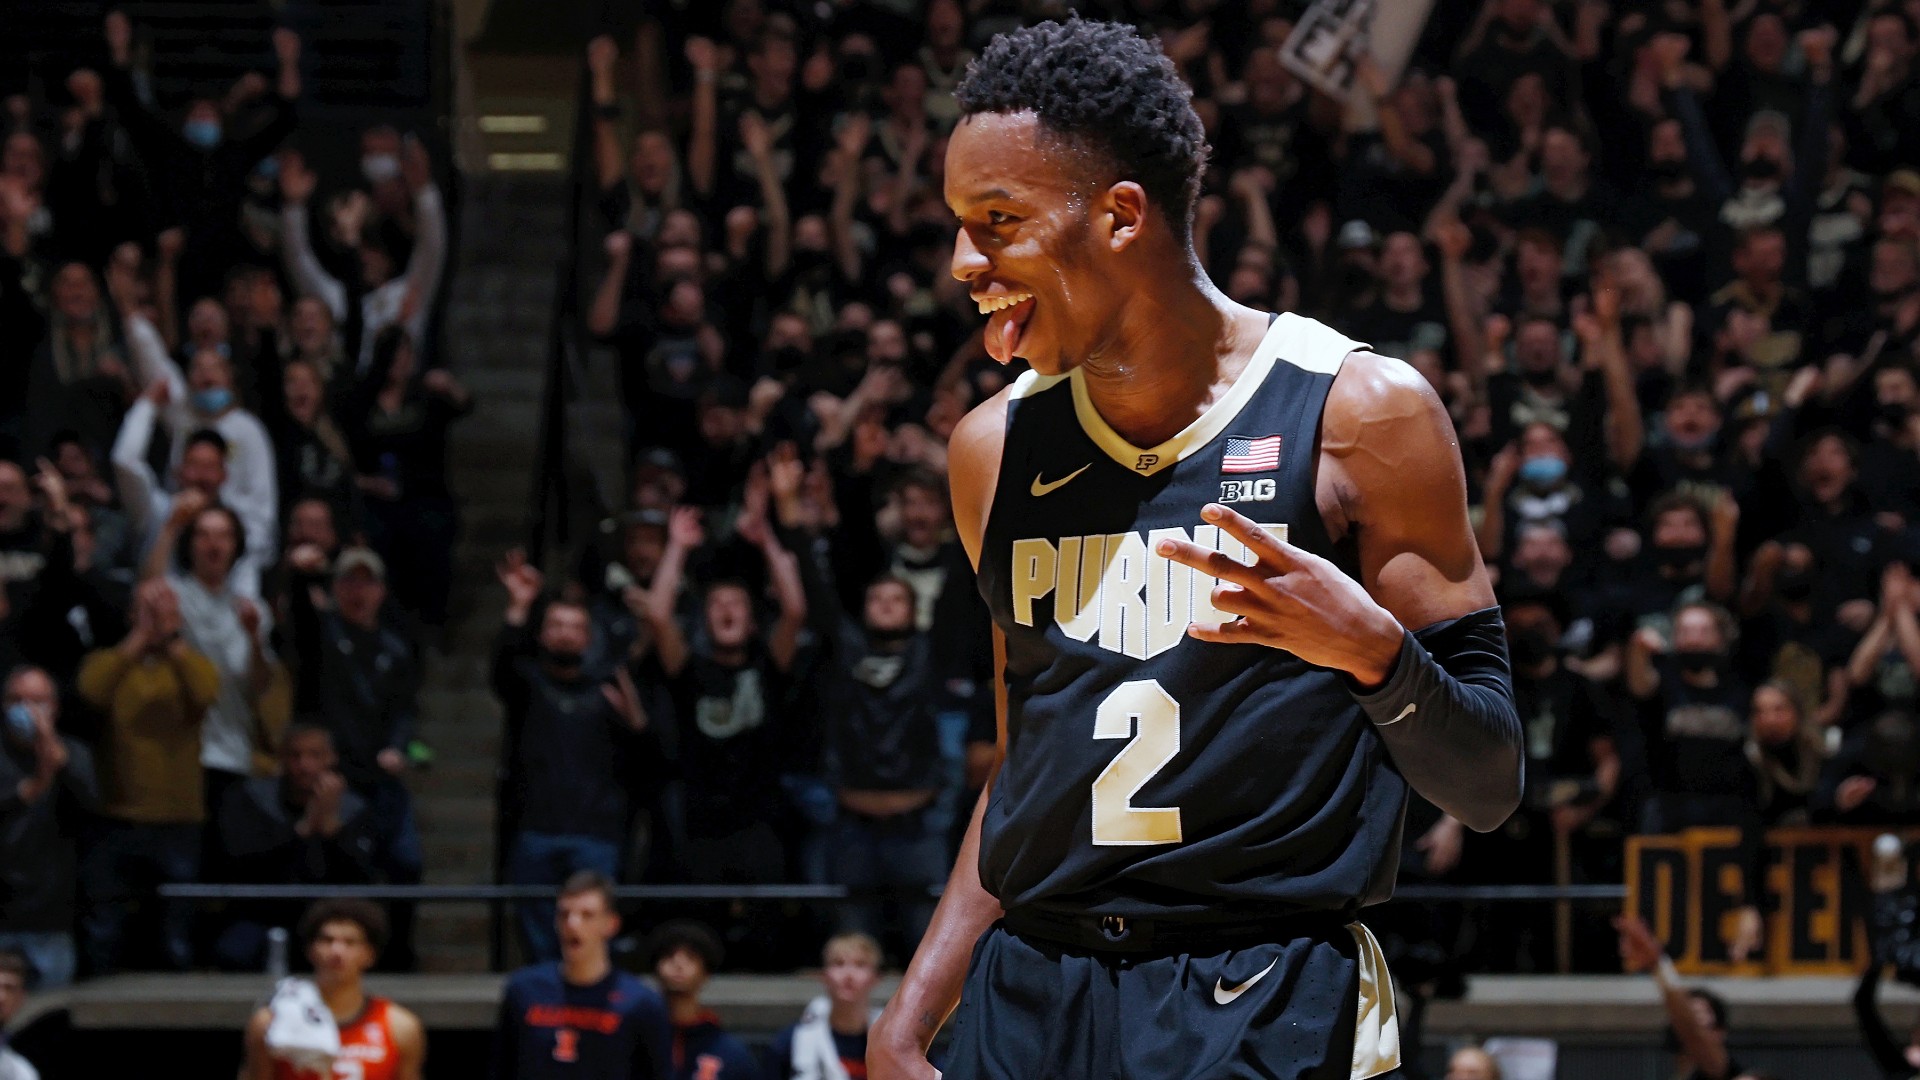 Purdue vs. Michigan College Basketball Odds, Picks, Predictions: Don’t Overthink This Spot (Thursday, February 10) article feature image